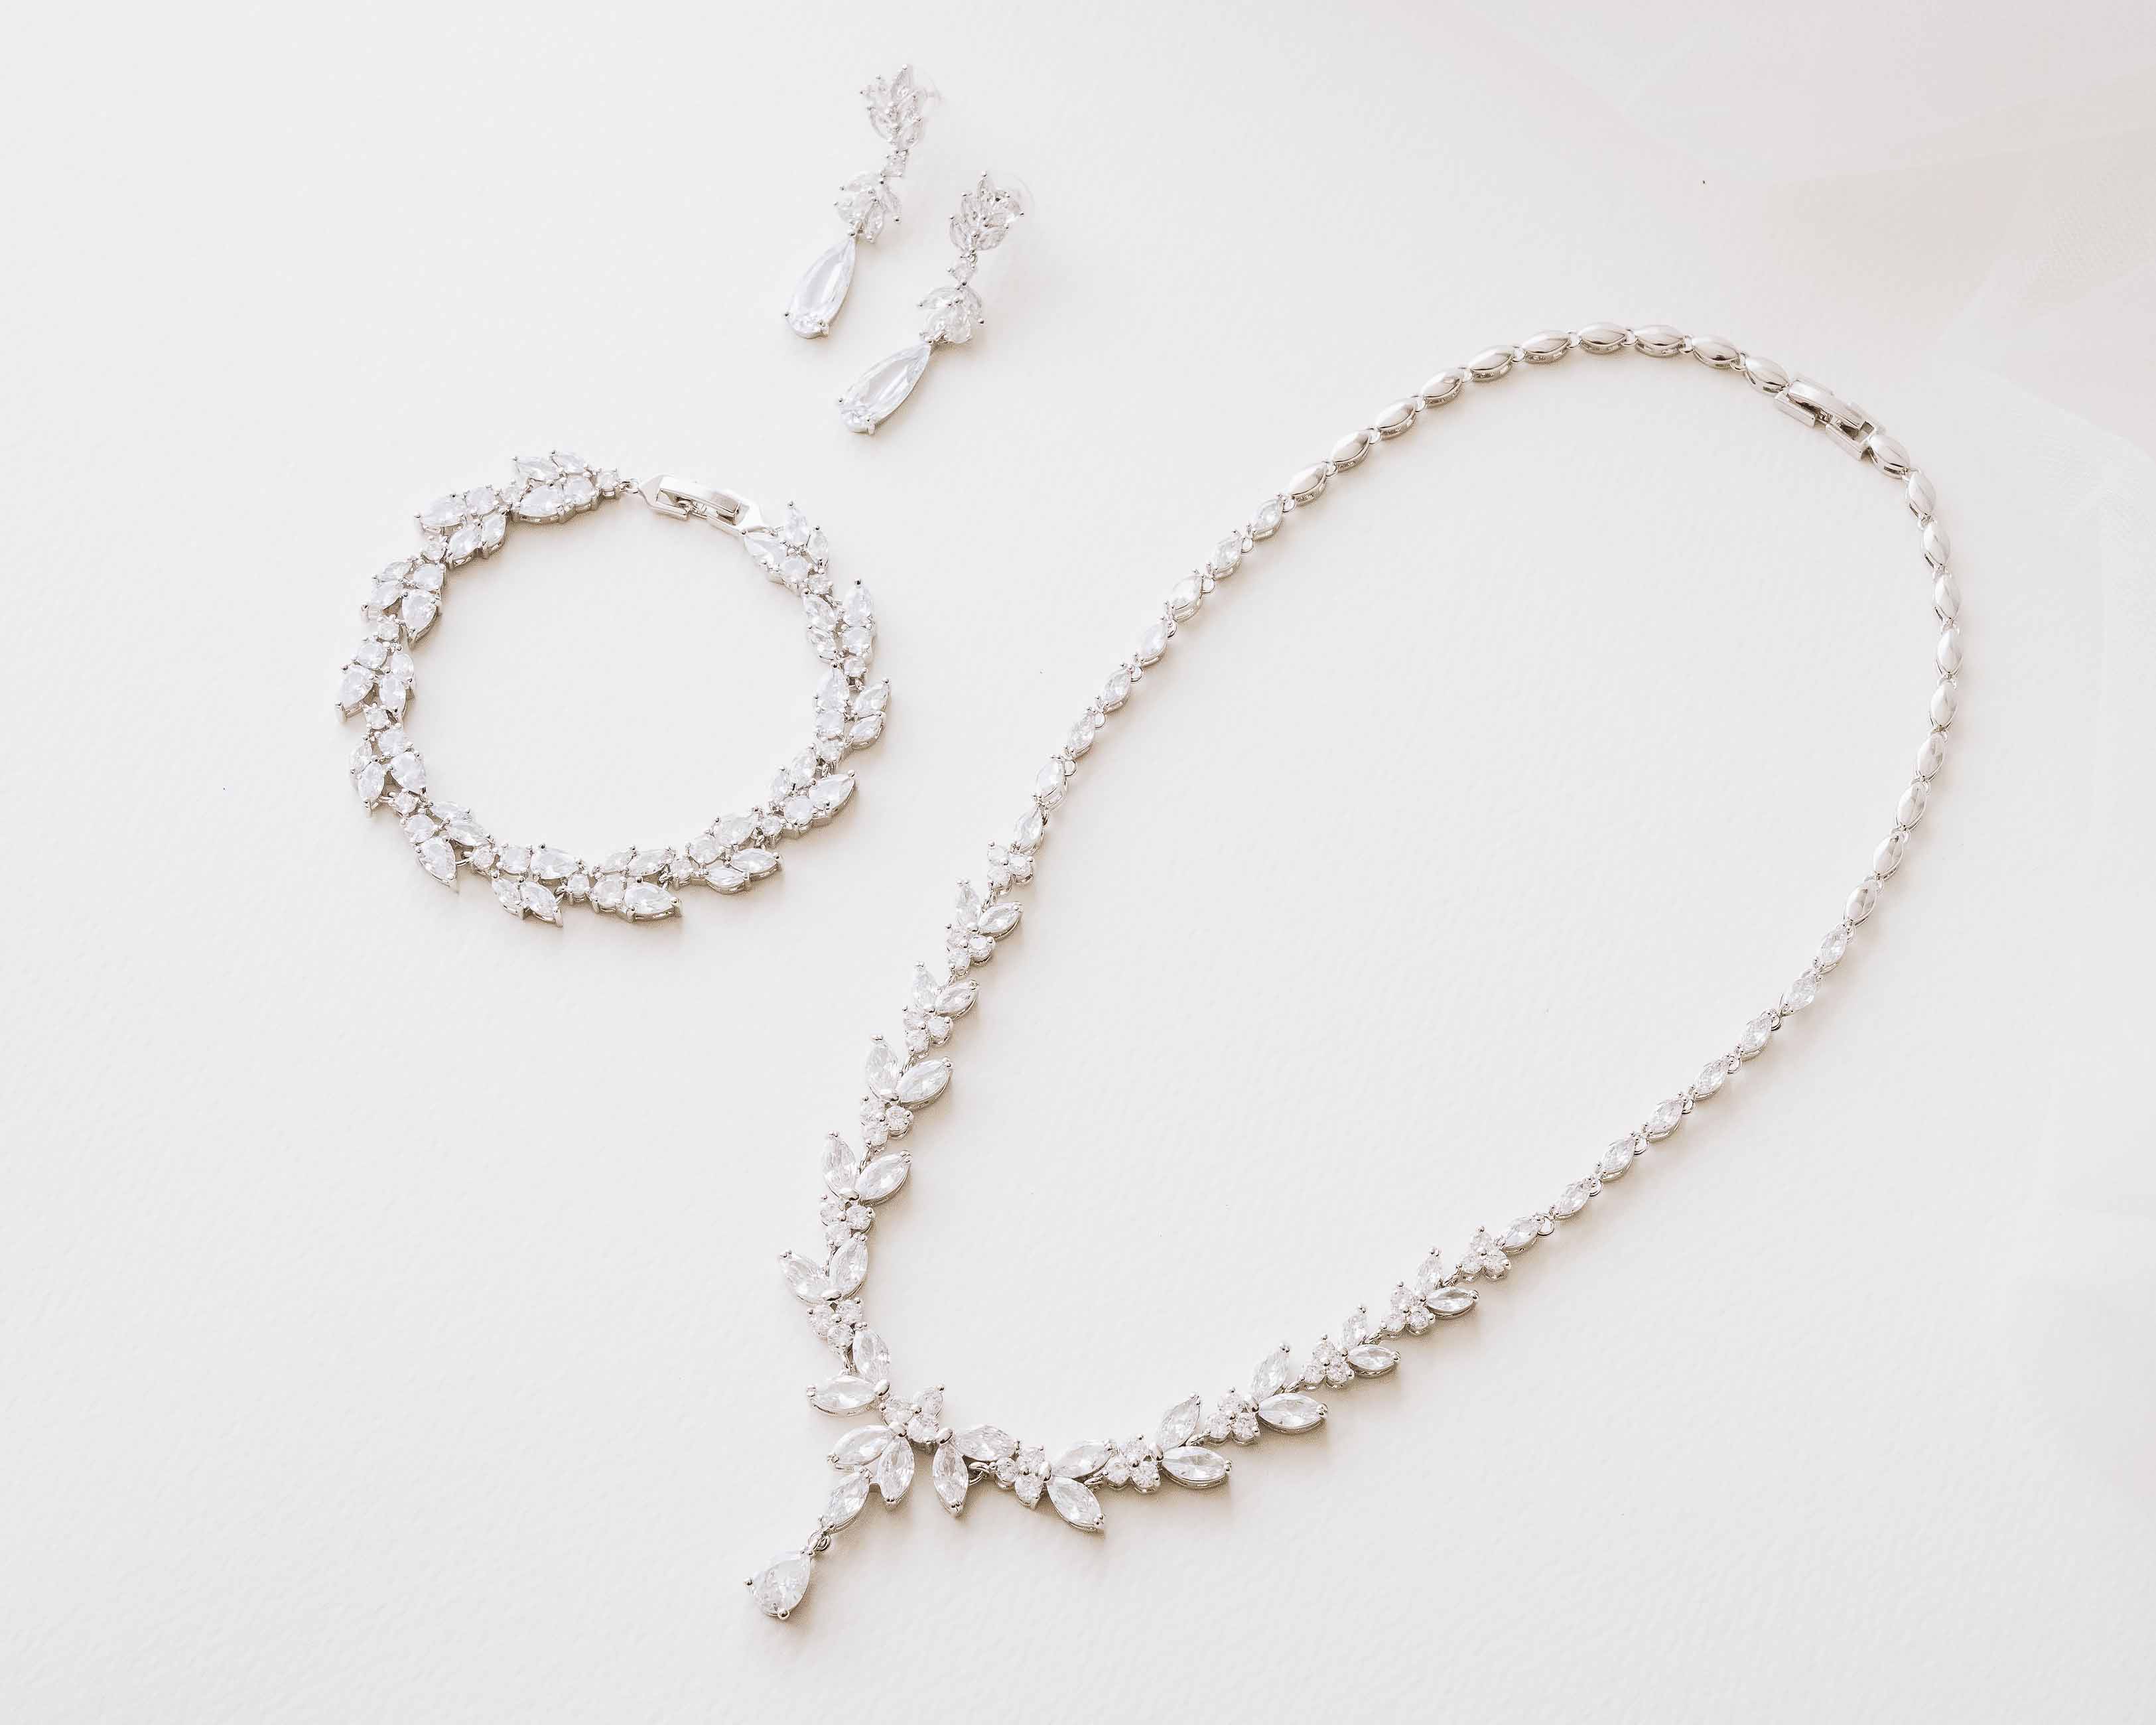 Silver Wedding Jewelry Set - The perfect Bridal Accessories.